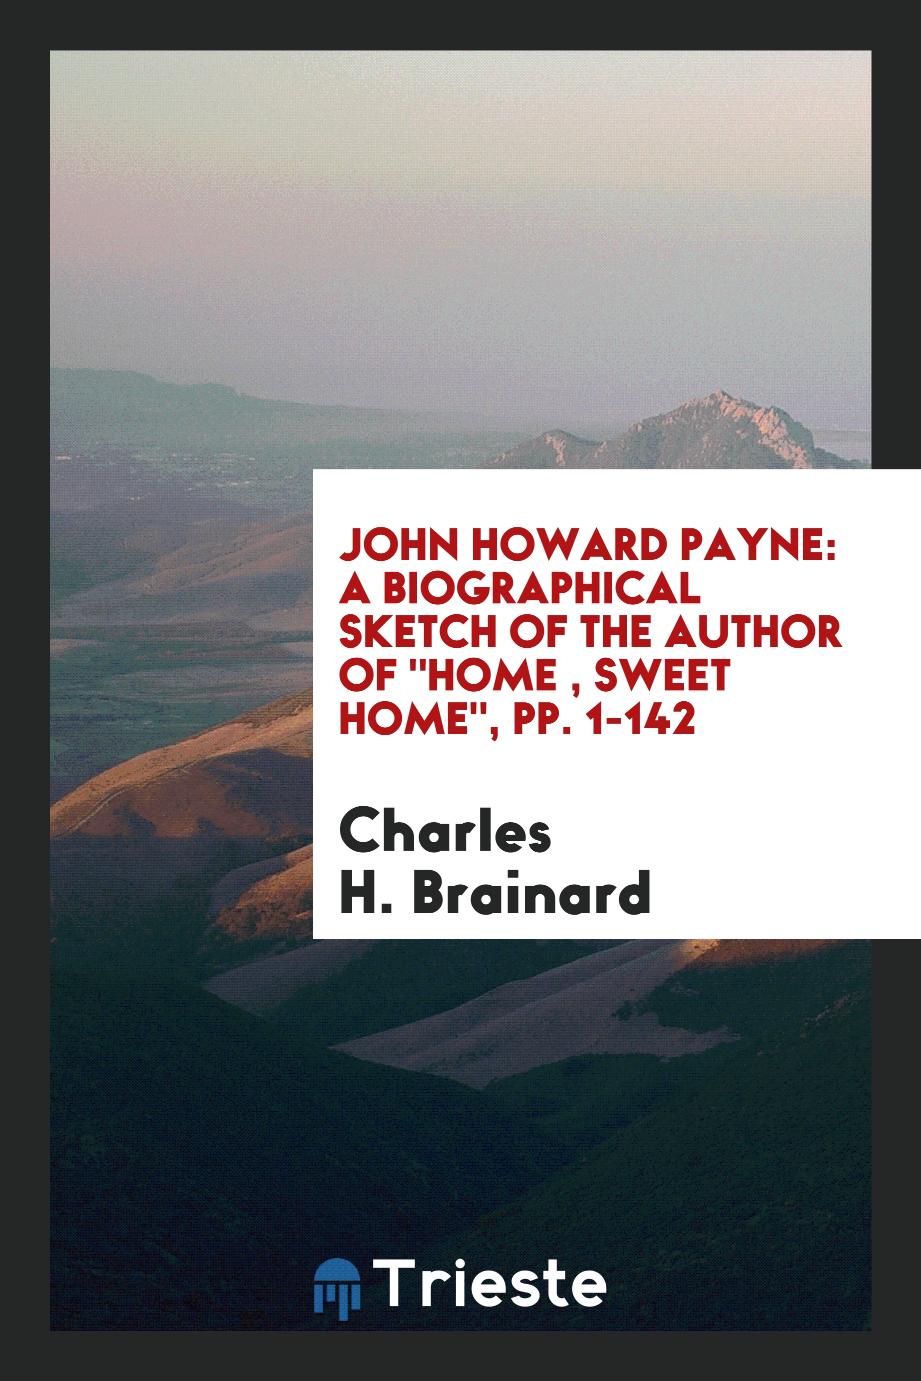 John Howard Payne: A Biographical Sketch of the Author of "Home , Sweet Home", pp. 1-142